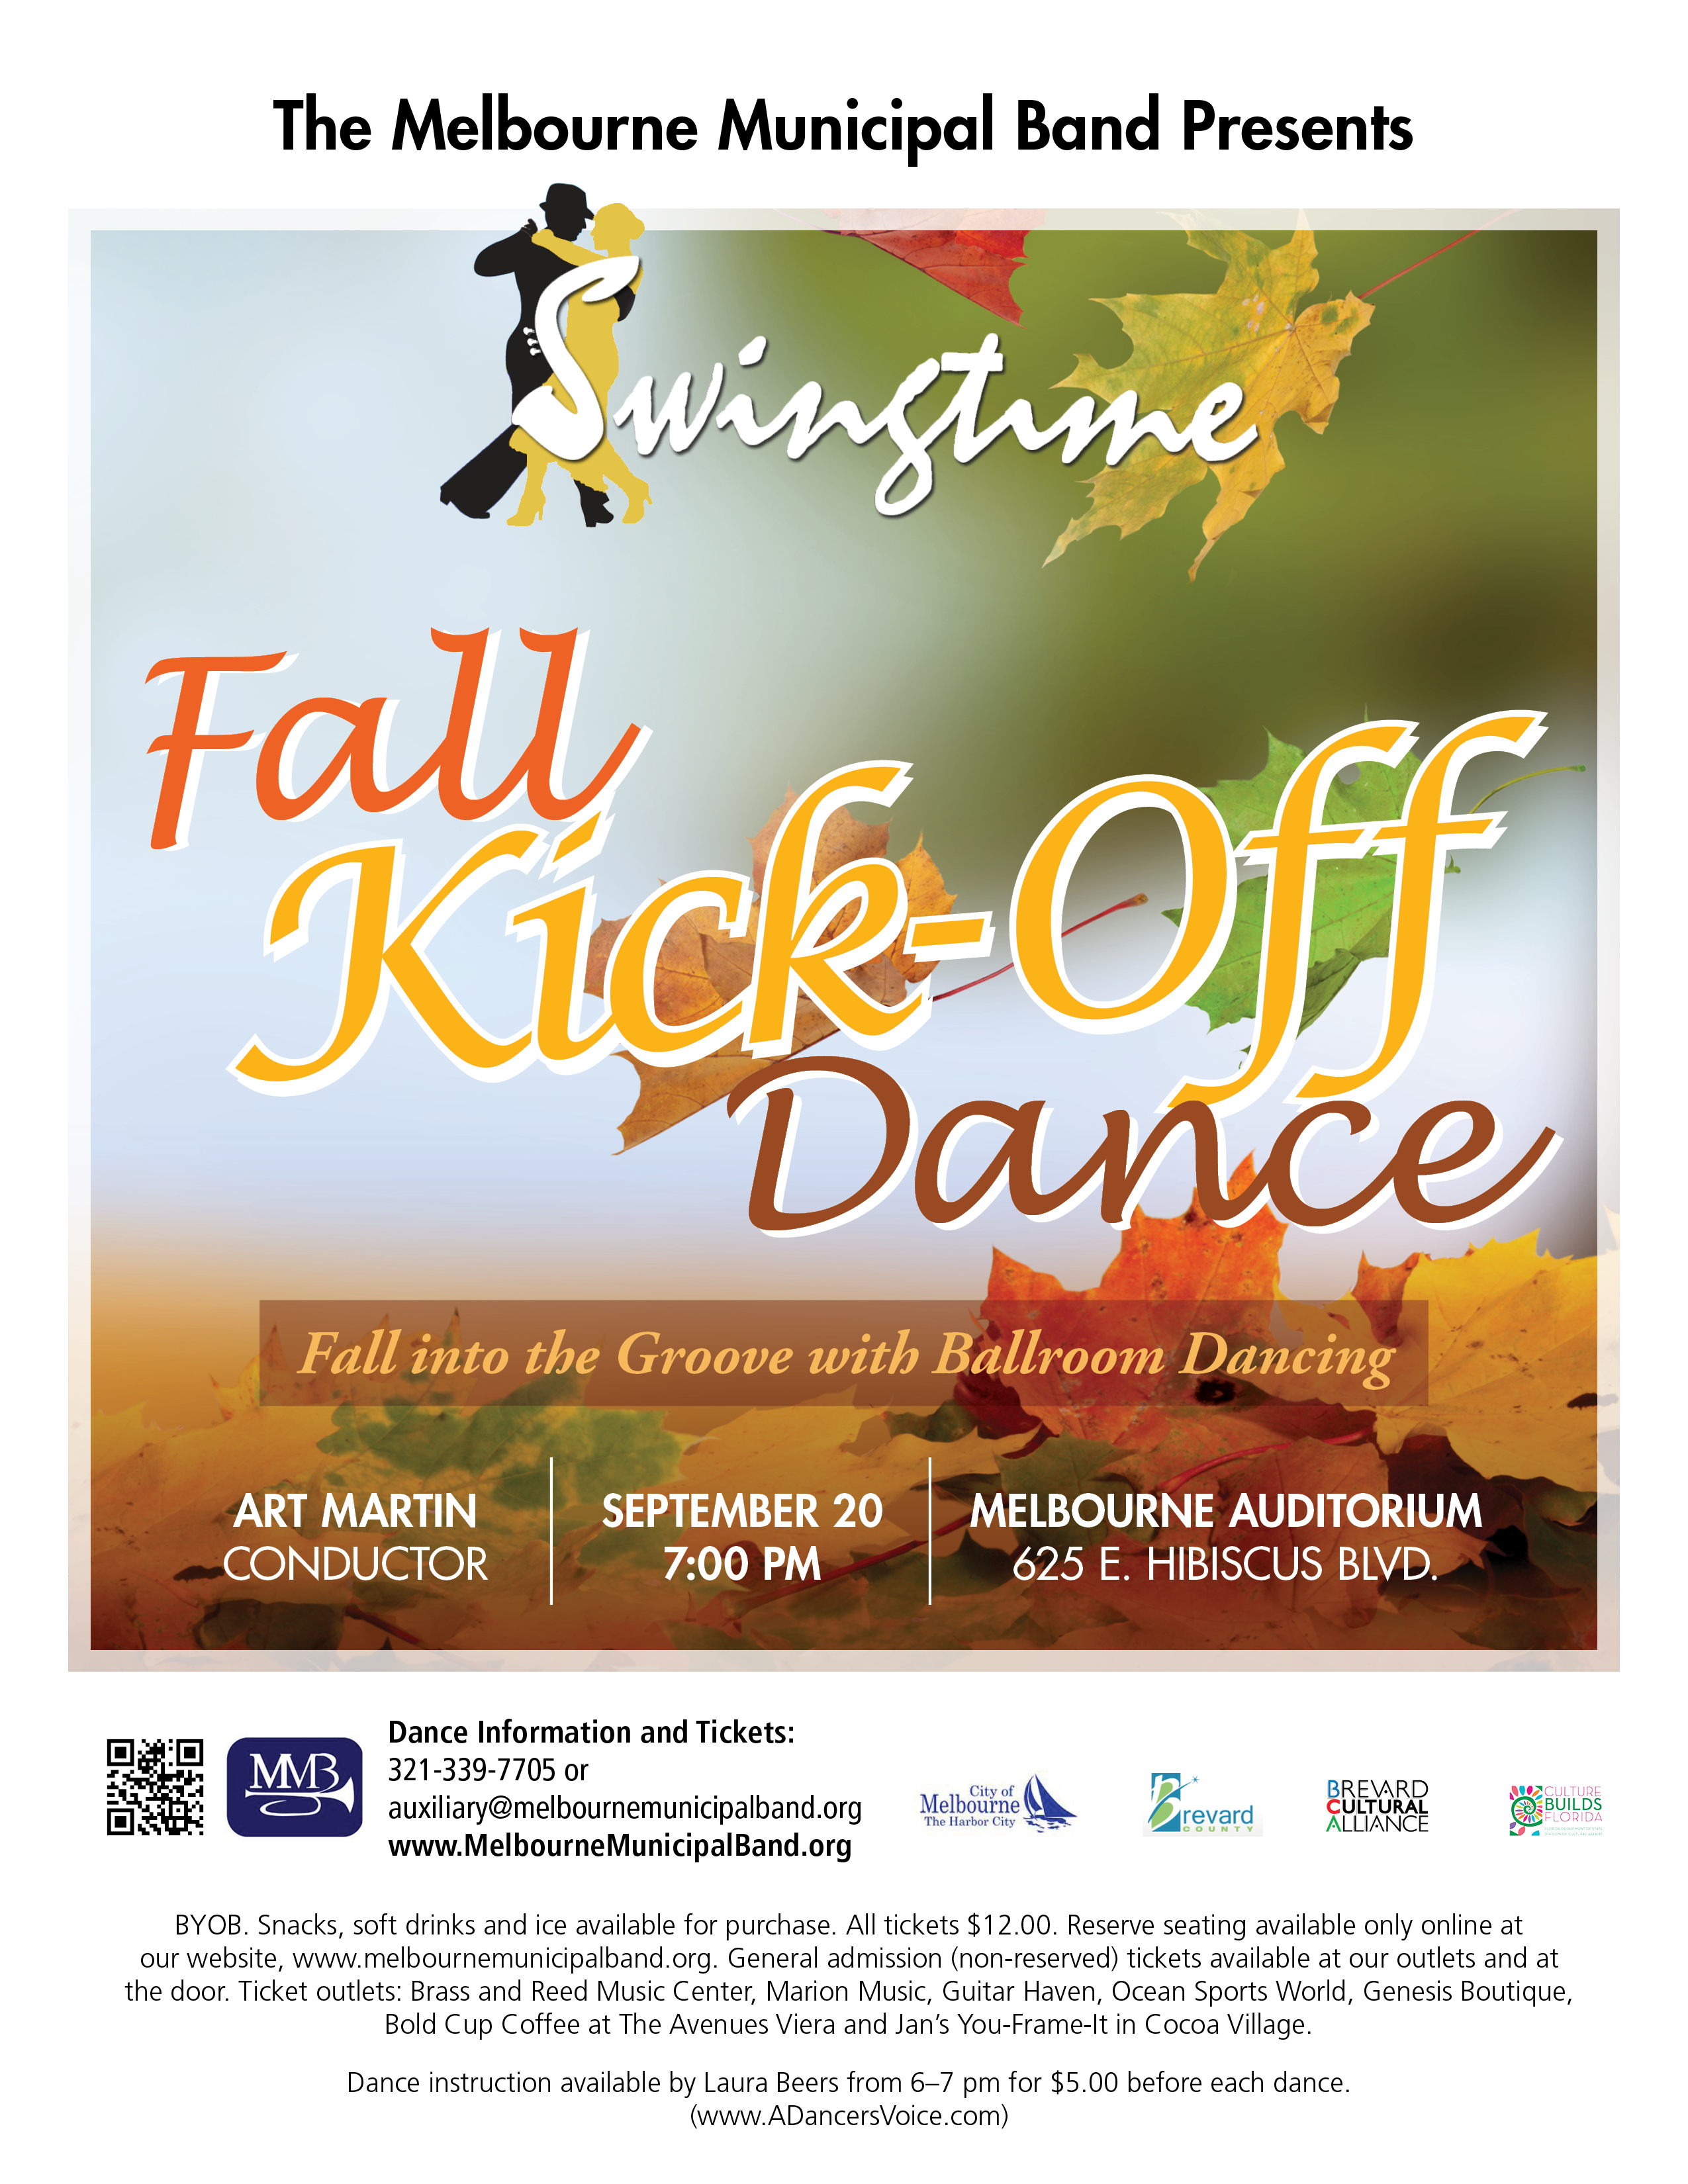 Fall Kick-Off Dance presented by The Melbourne Municipal Band